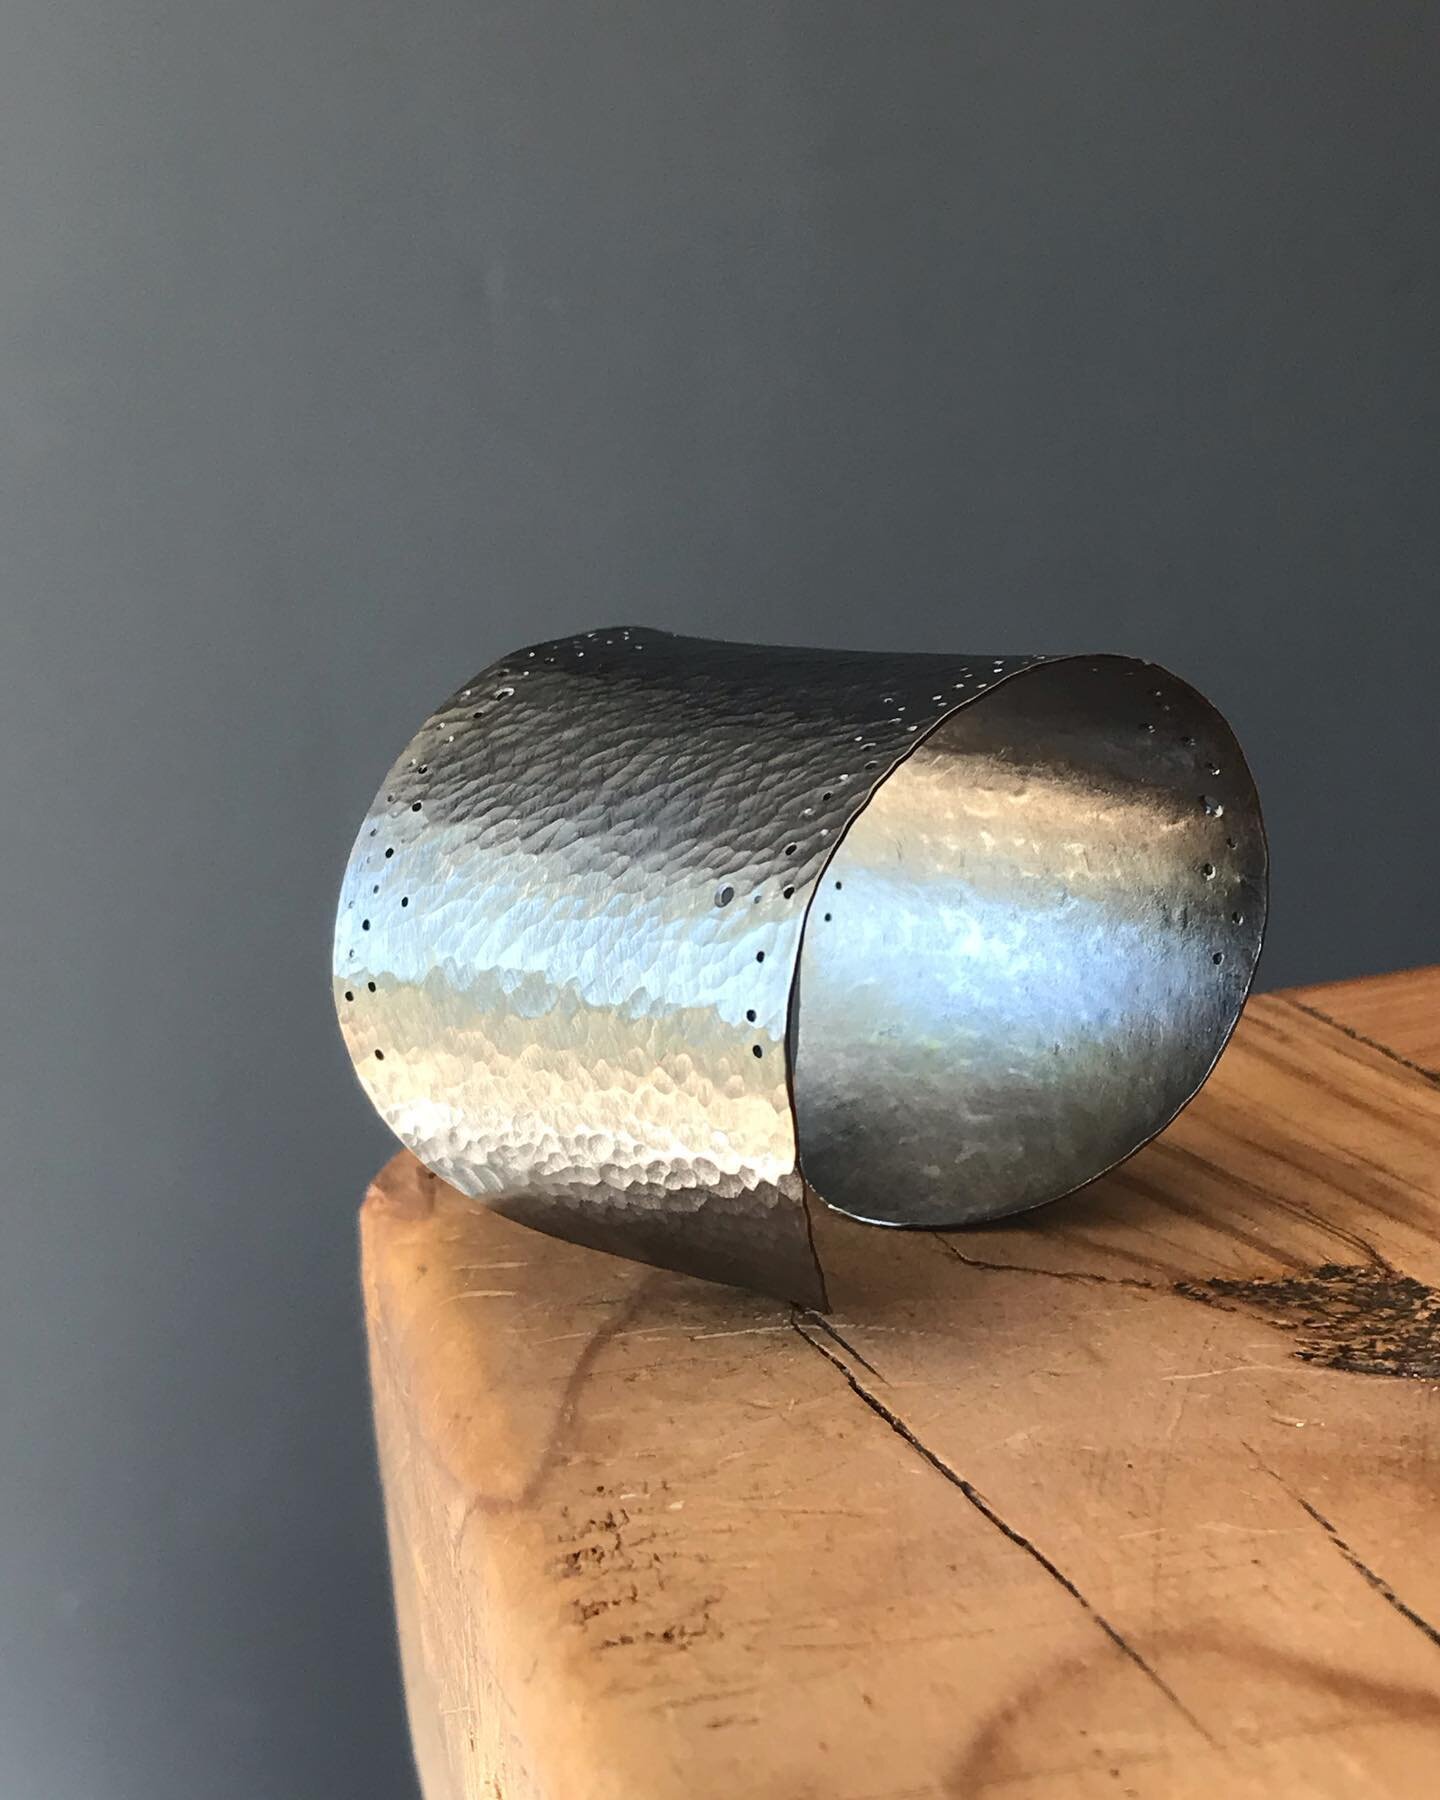 I do like doing something a bit different and this was made last week as a special order for a customer. A 2 inch wide, silver cuff. All carefully hammered with dotty edgings. Not heavy, but comfortable and looks really great shimmering in the sun. I